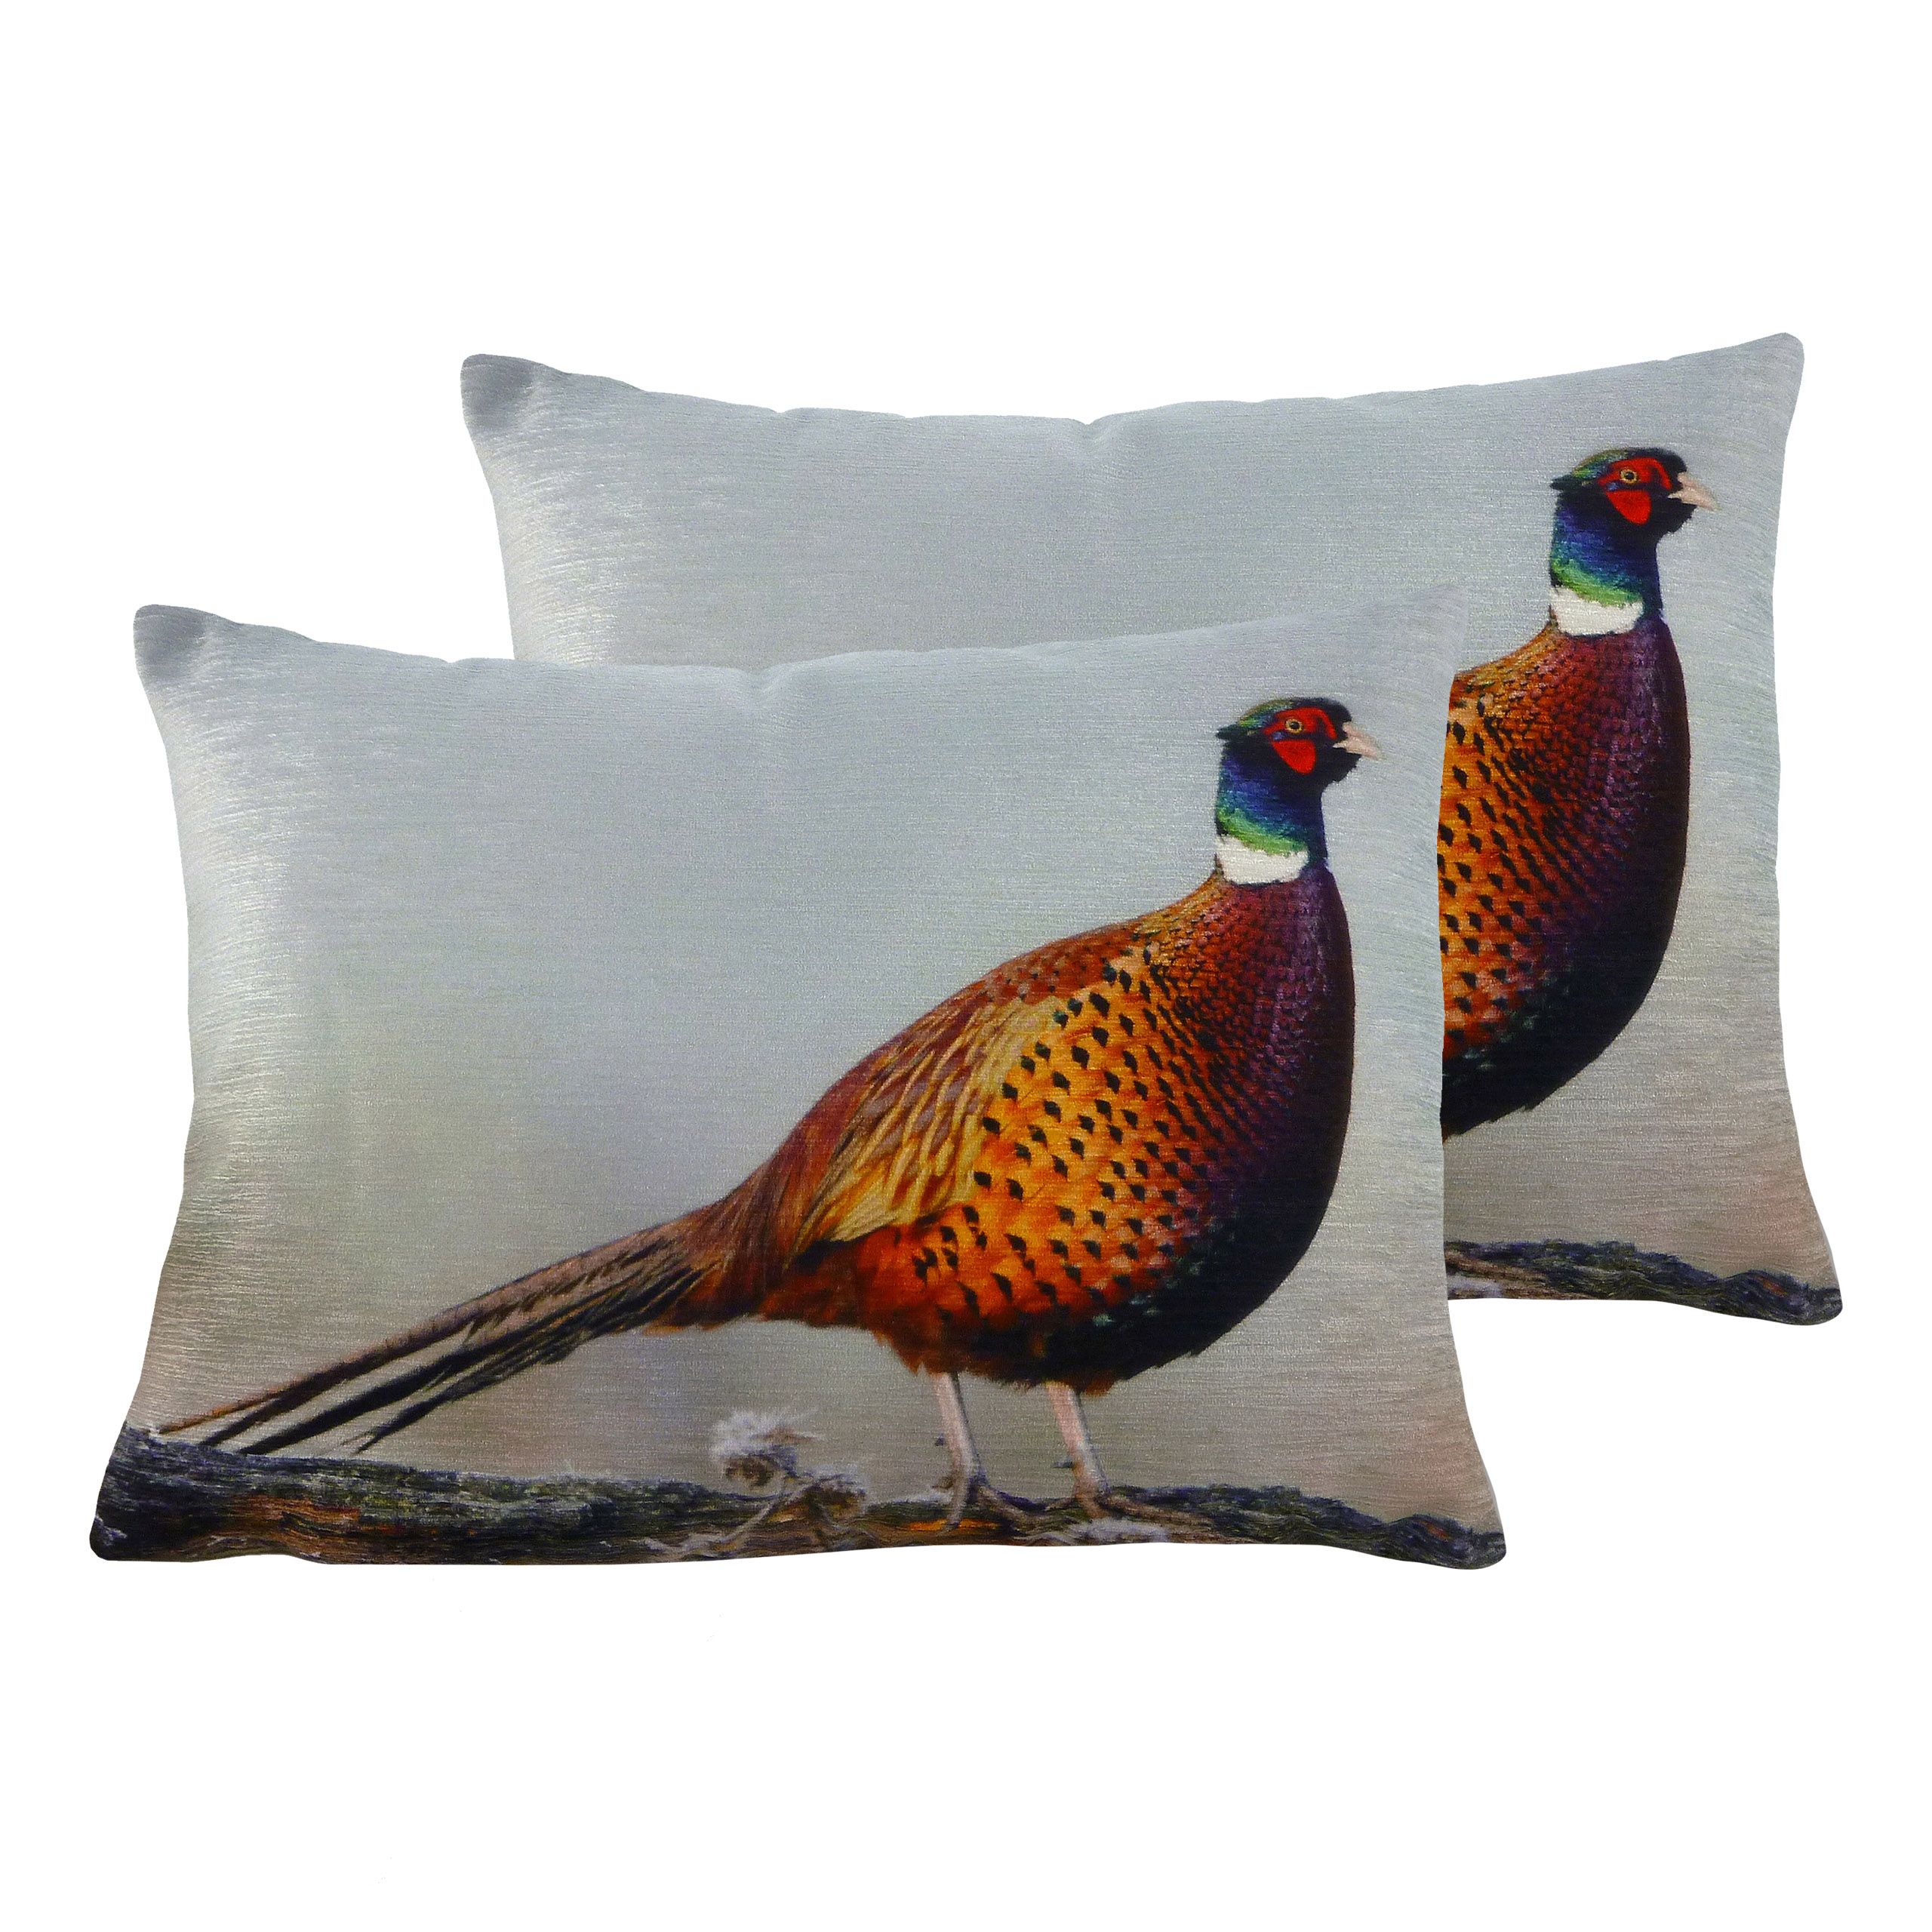 Add some elegance to your home with this luxury Pheasant velvet cushion. With the design printed on a chenille front and a velvet reverse this country inspired cushion is a true masterpiece. This cushion would be a brilliant addition to any home and especially with a country style interior.